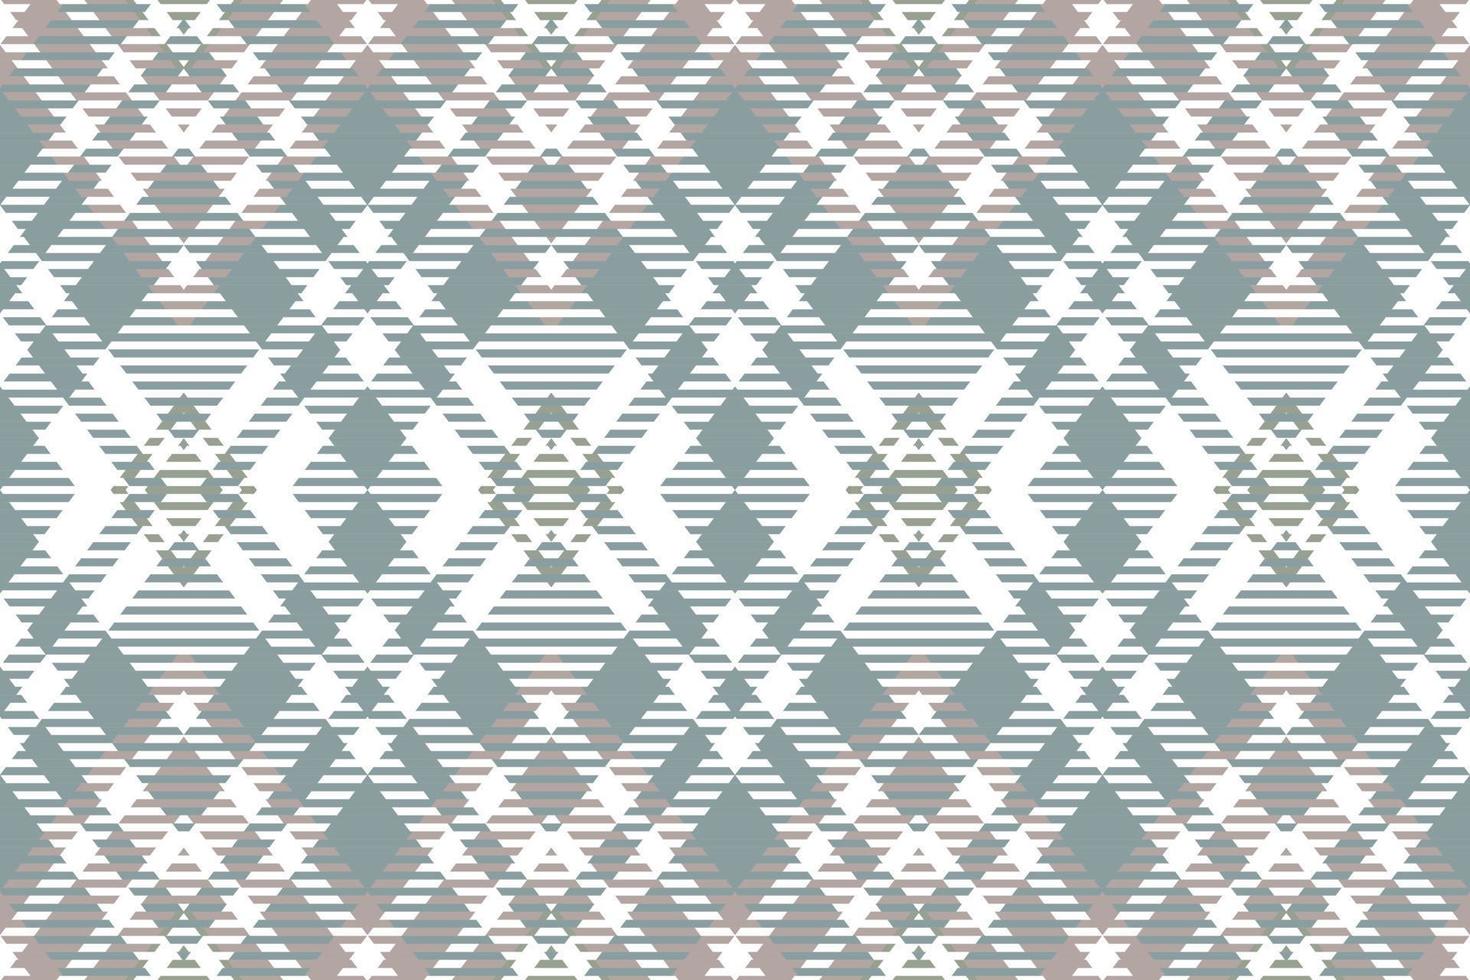 abstract tartan pattern seamless textile is woven in a simple twill, two over two under the warp, advancing one thread at each pass. vector